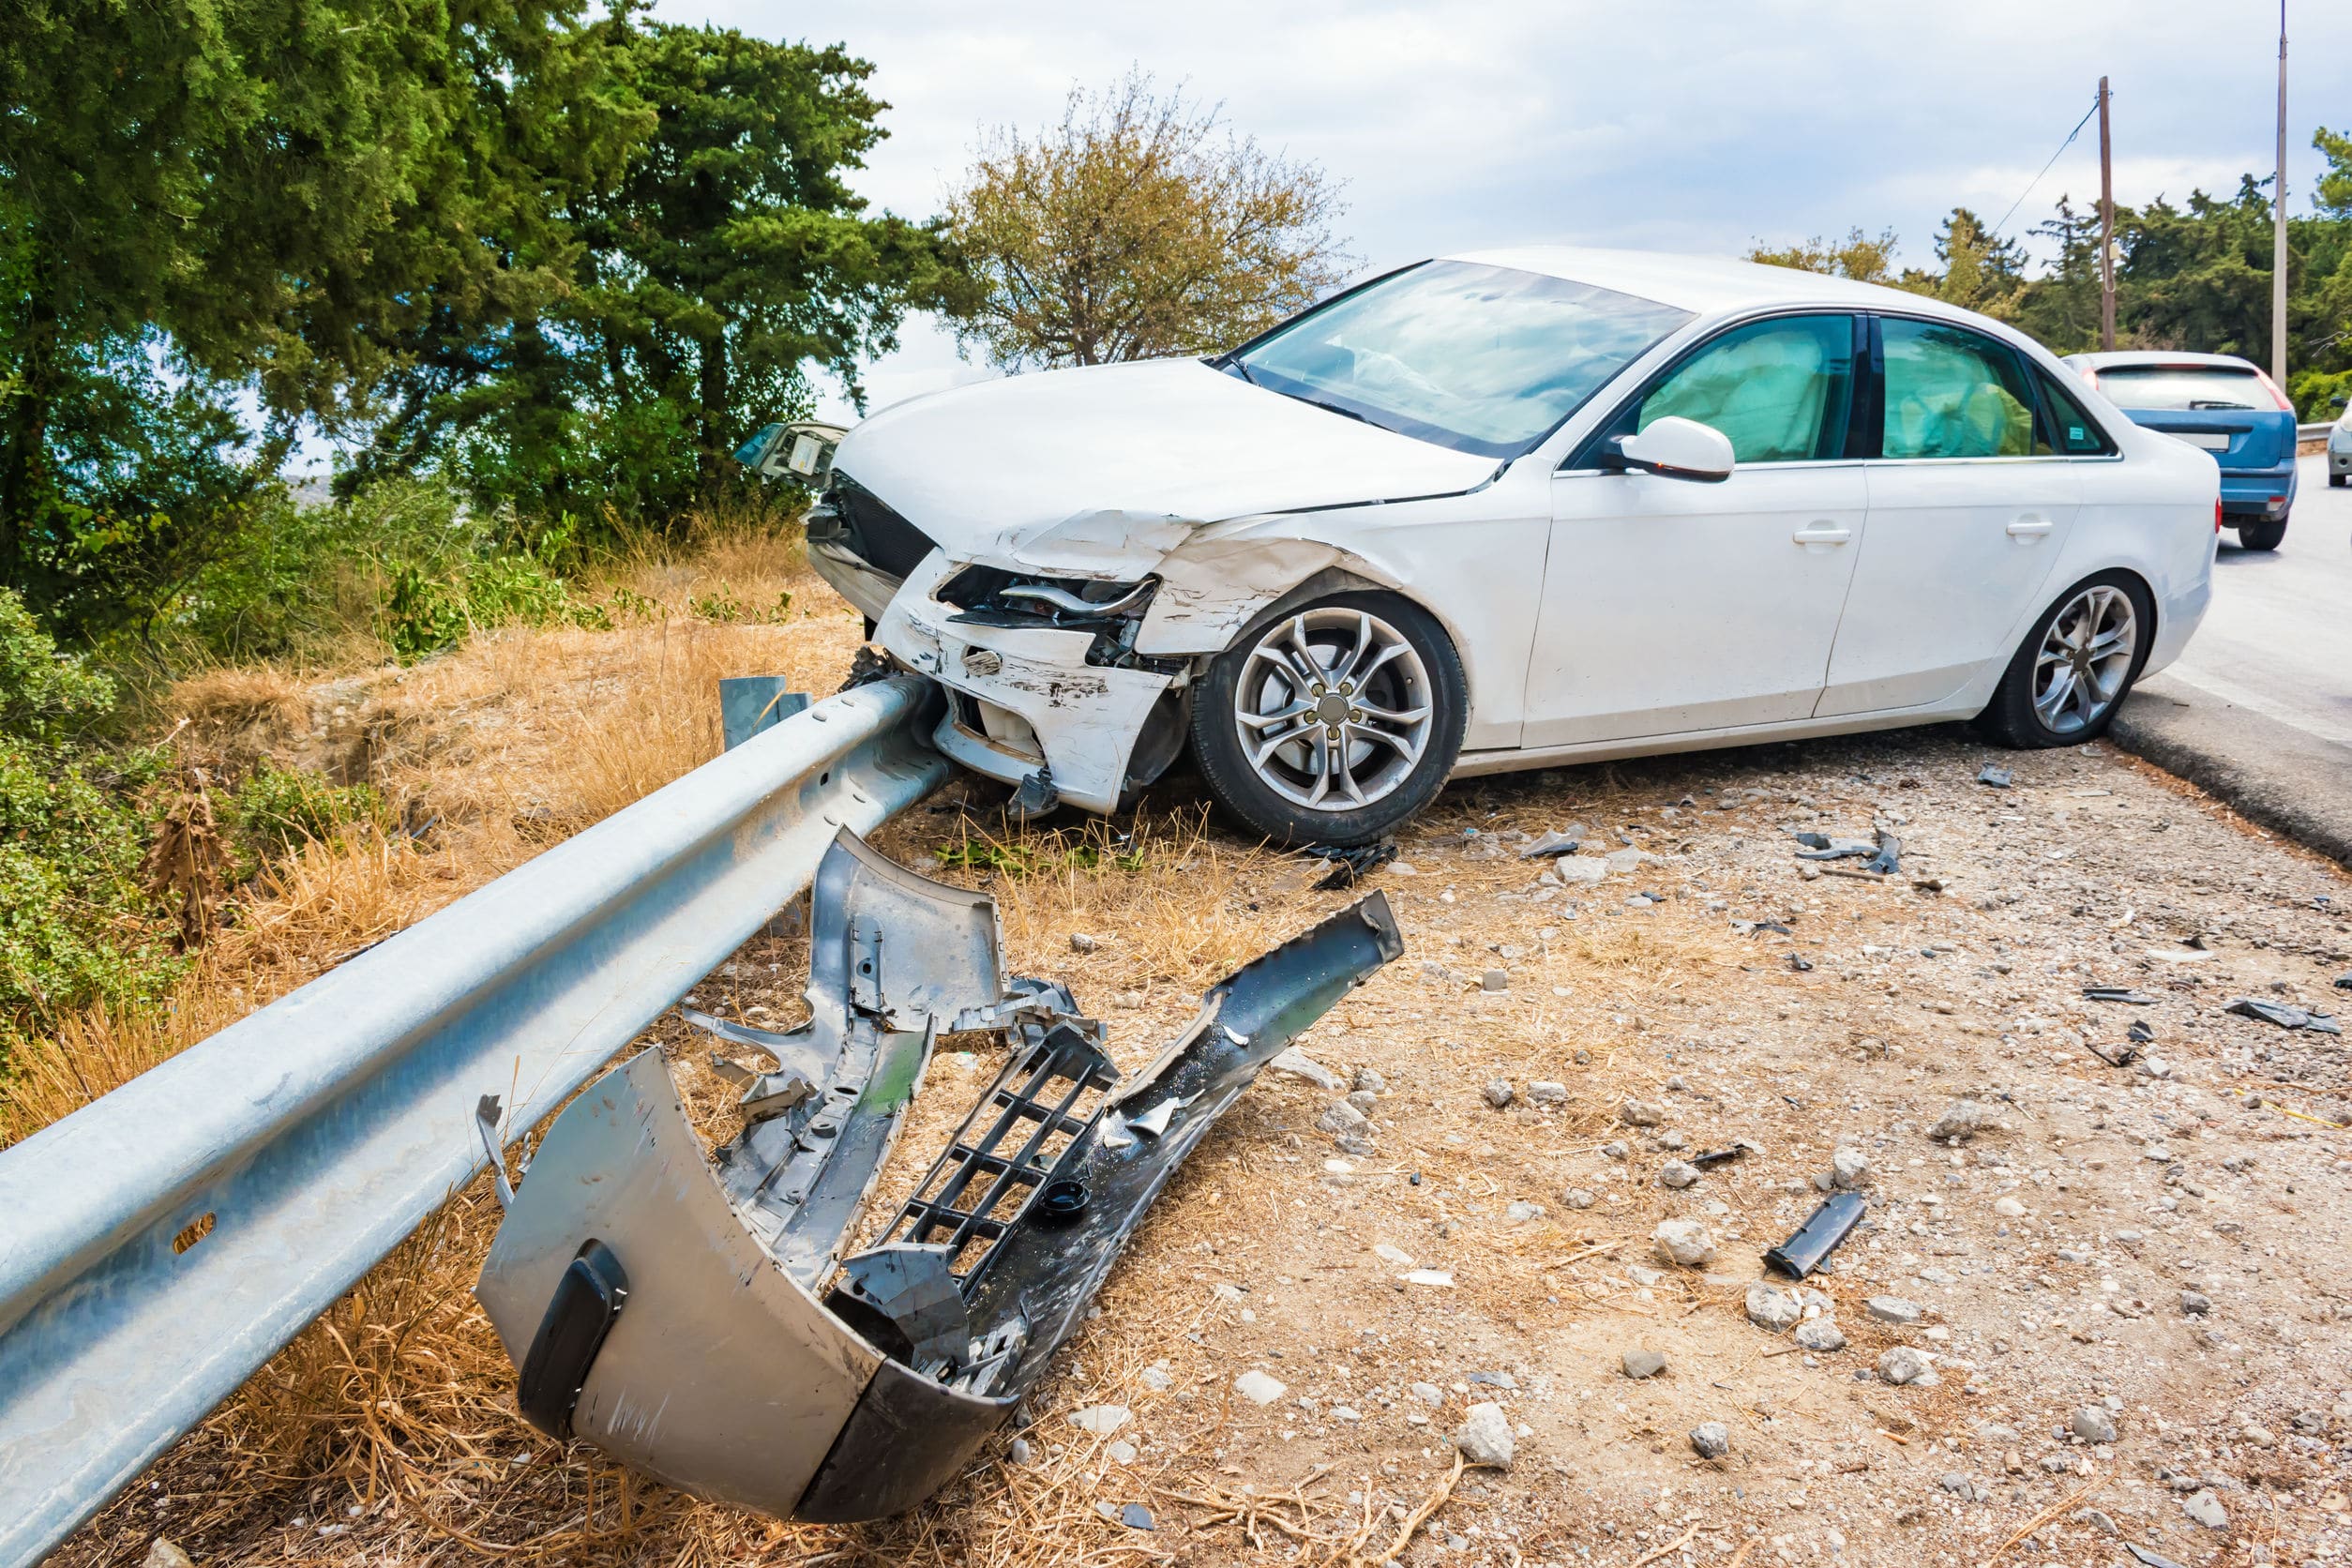 What's the Most Crash-Prone Car?